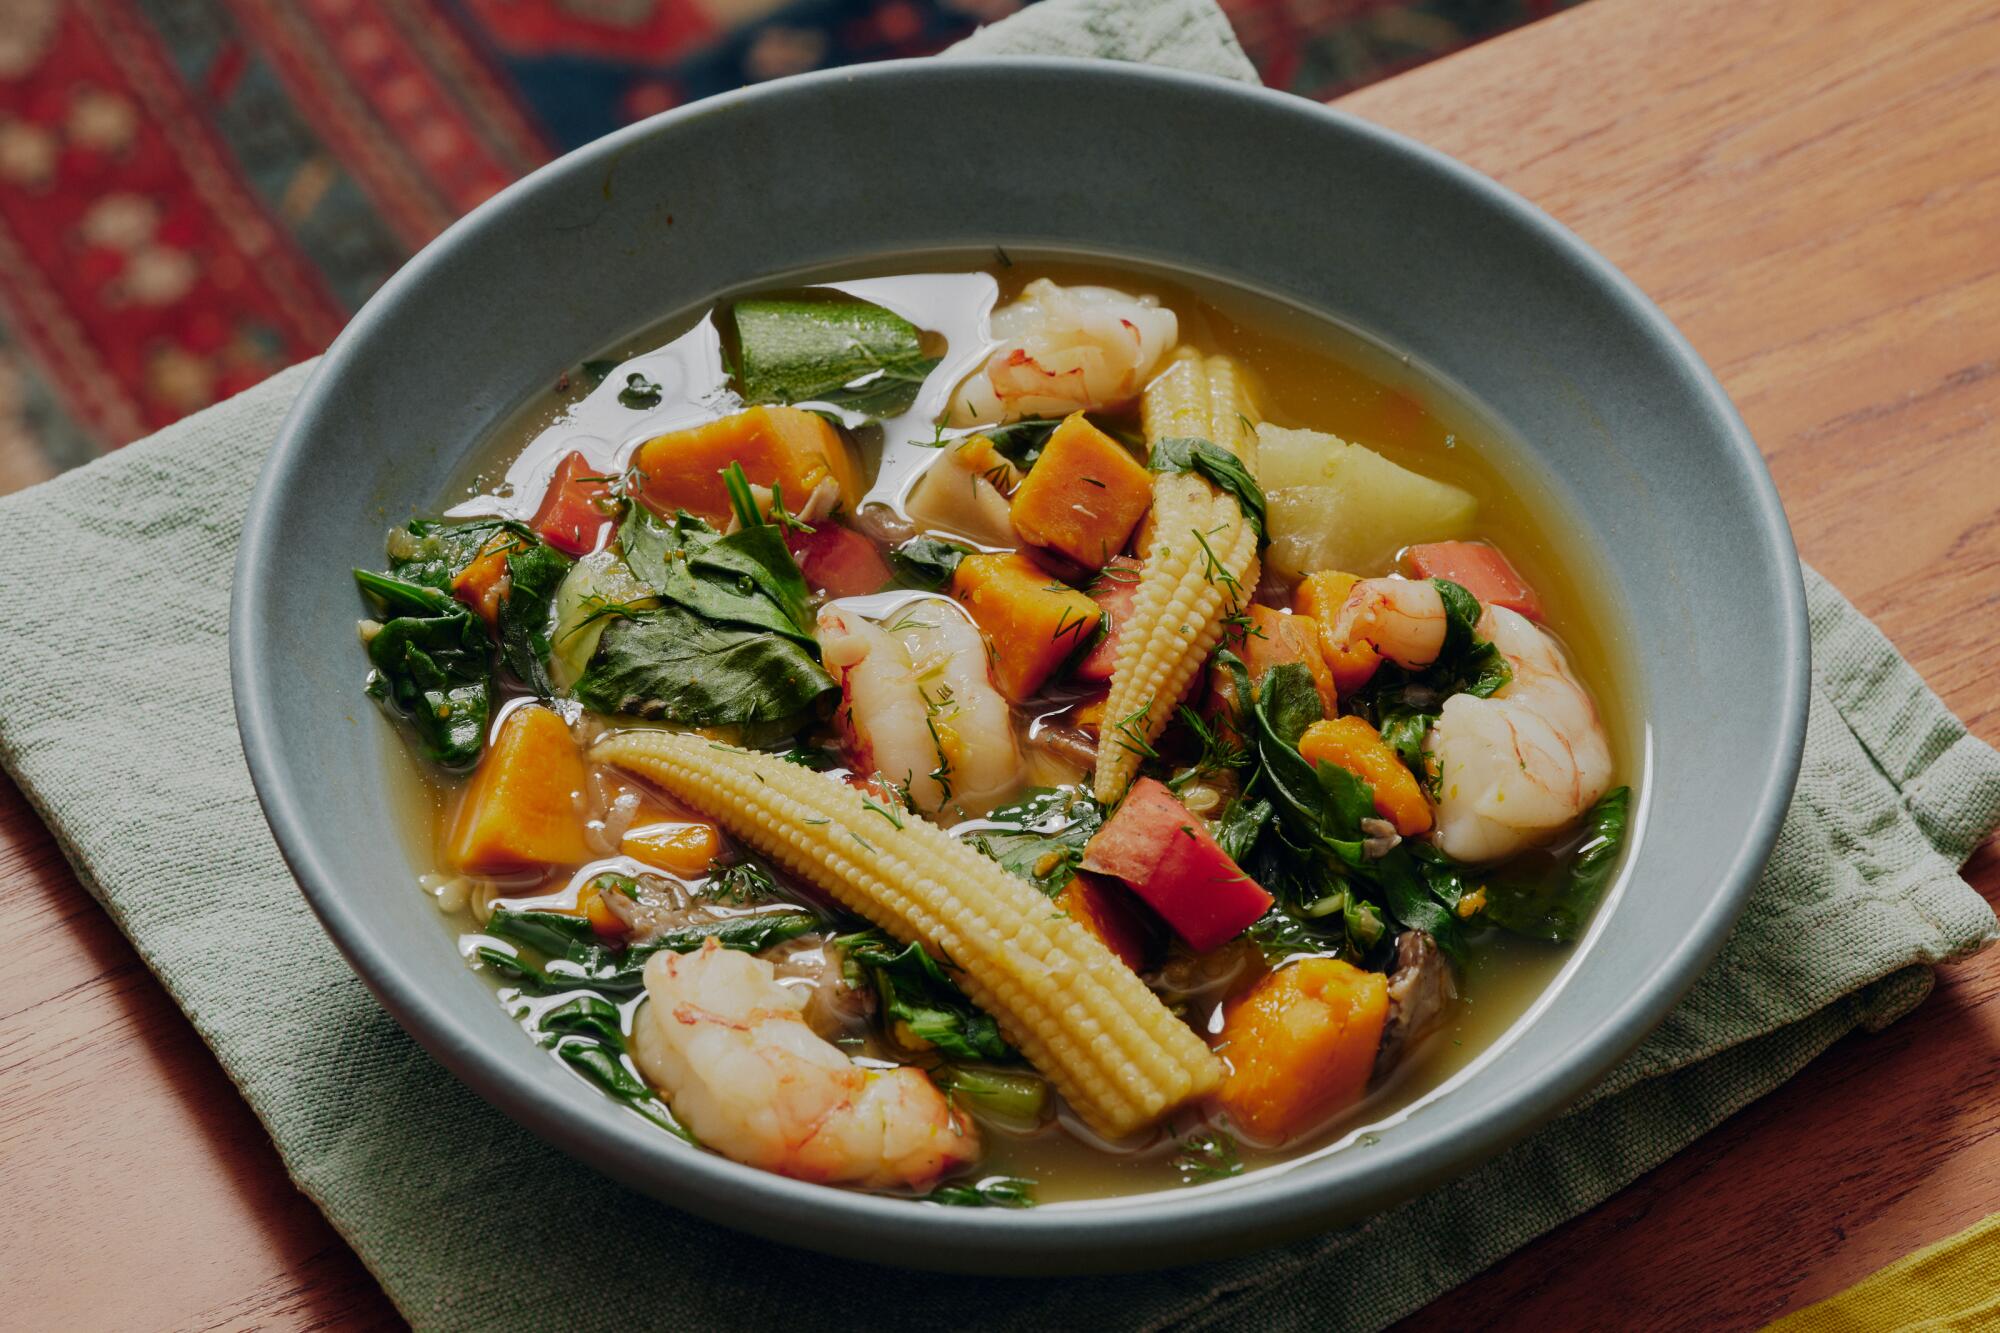 A bowl of soup filled with shrimp and vegetables including carrots and baby corn